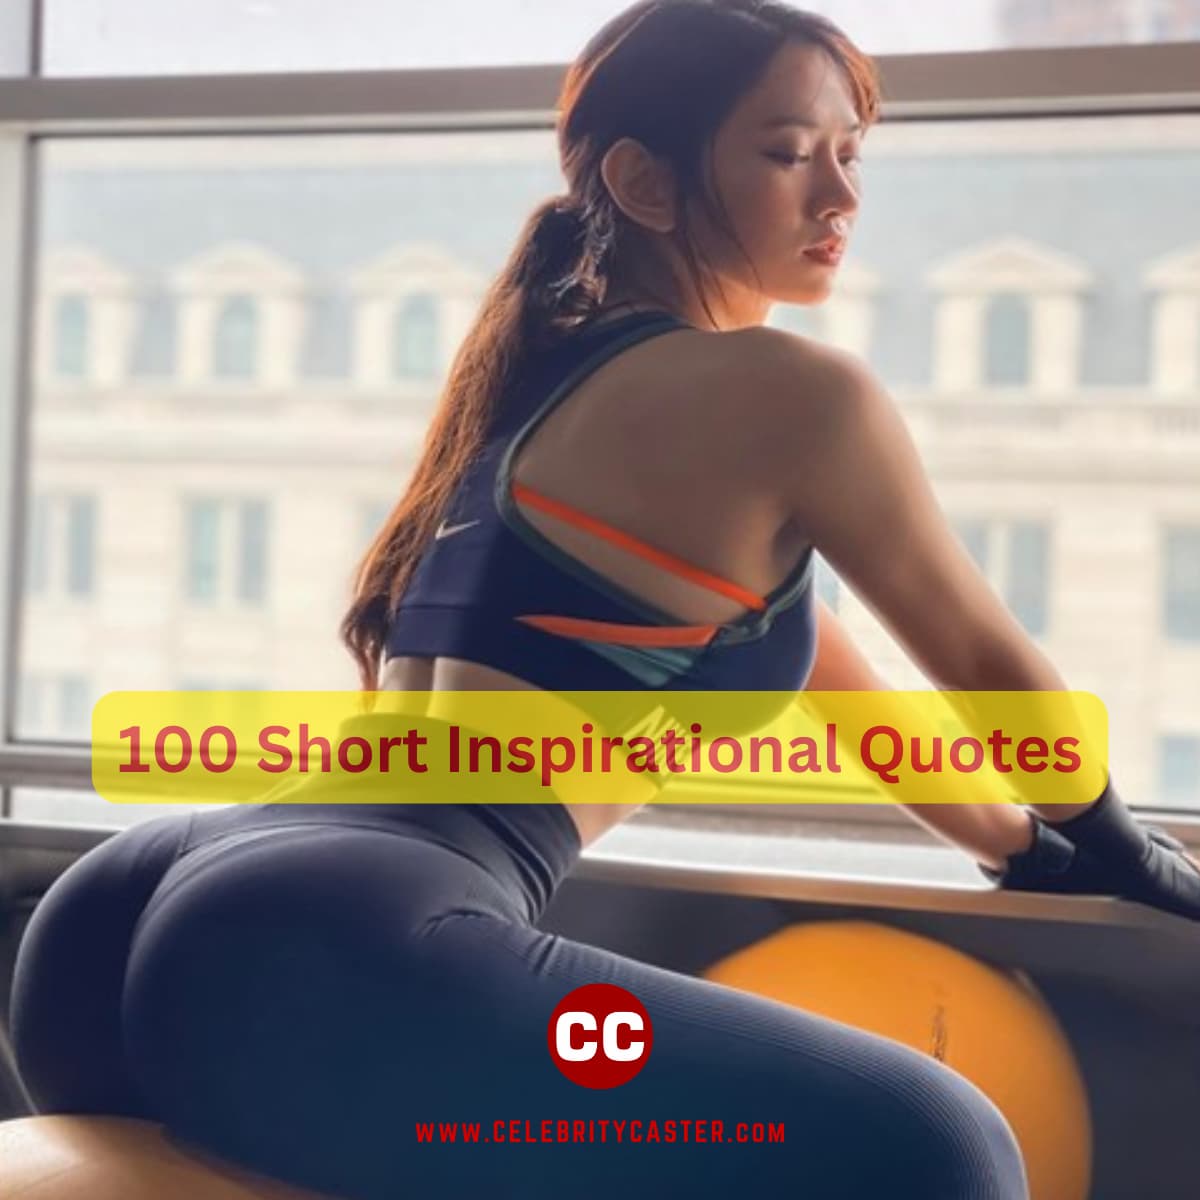 100 Short Inspirational Quotes